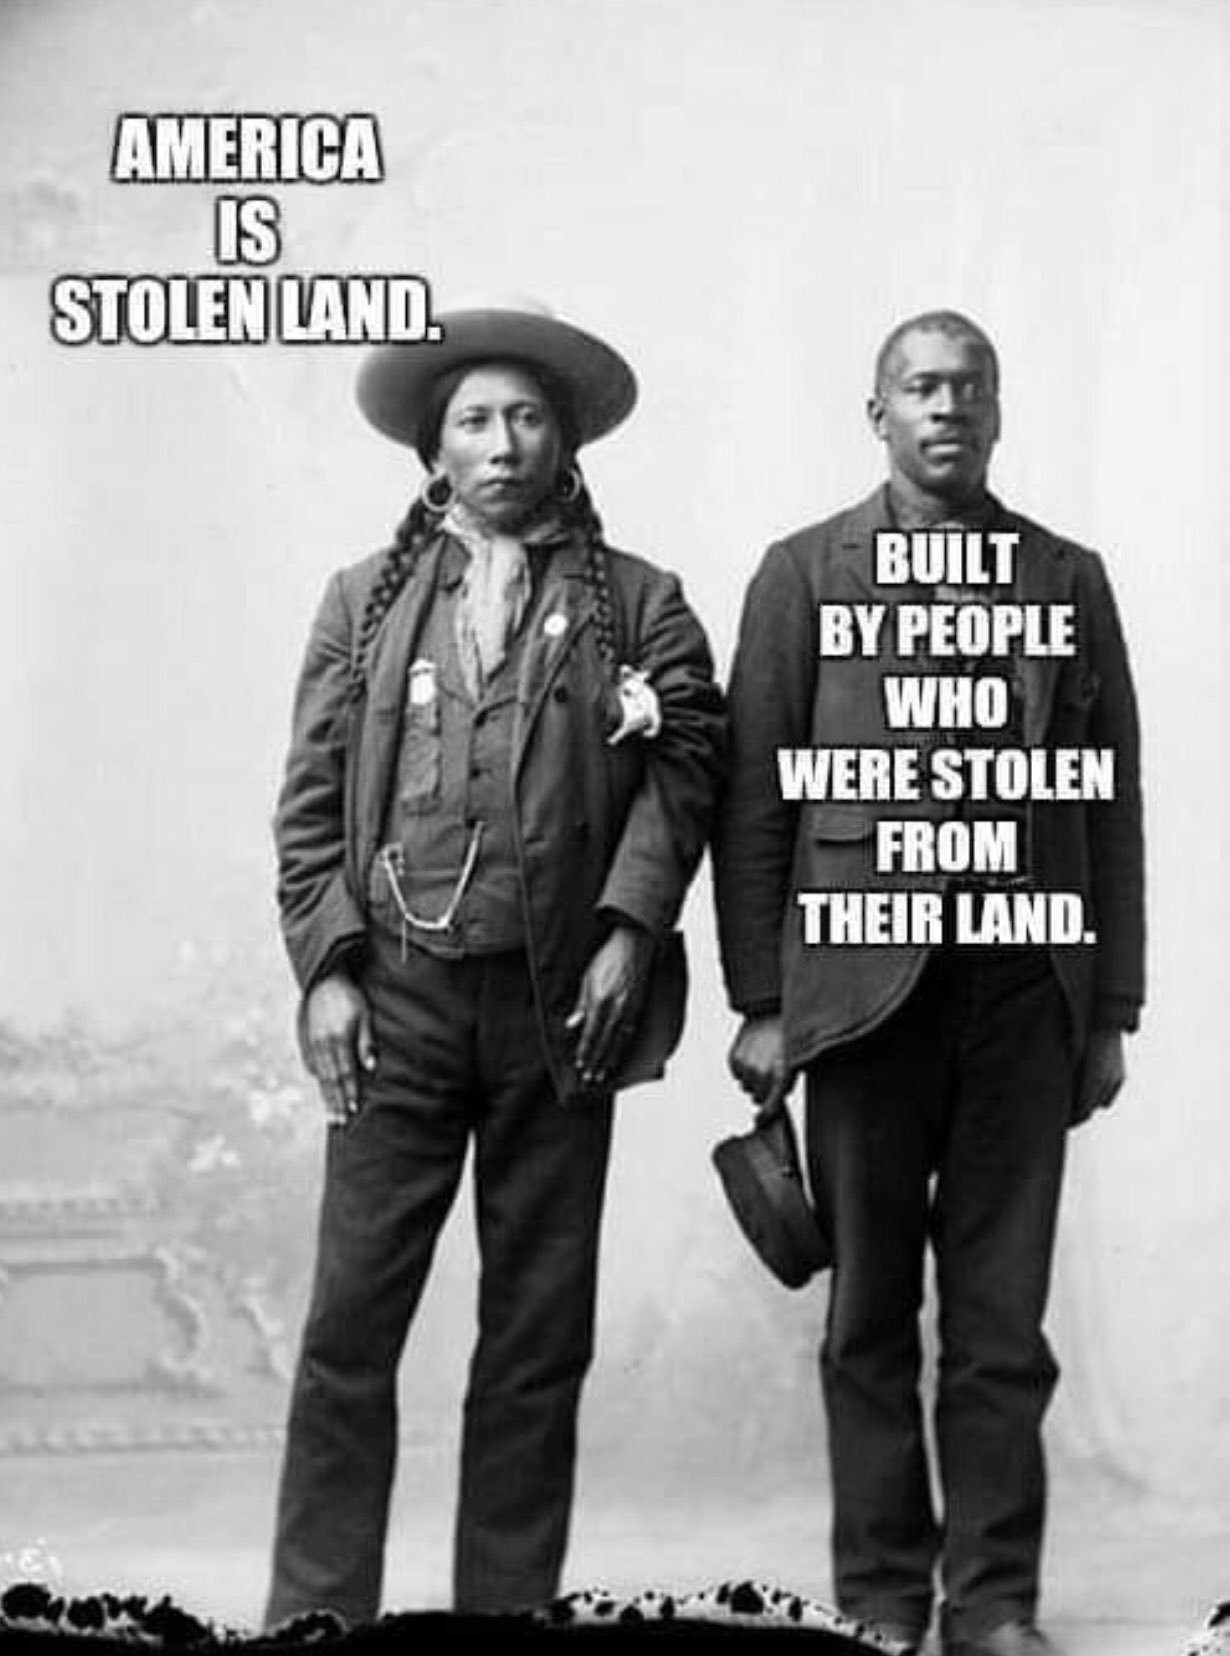 An old black-and-white photo. A Native American man stands next to a Black man. By the Native American man are the words 'America is stolen land'. By the Black man are the words 'Built by people who were stolen from their land'.